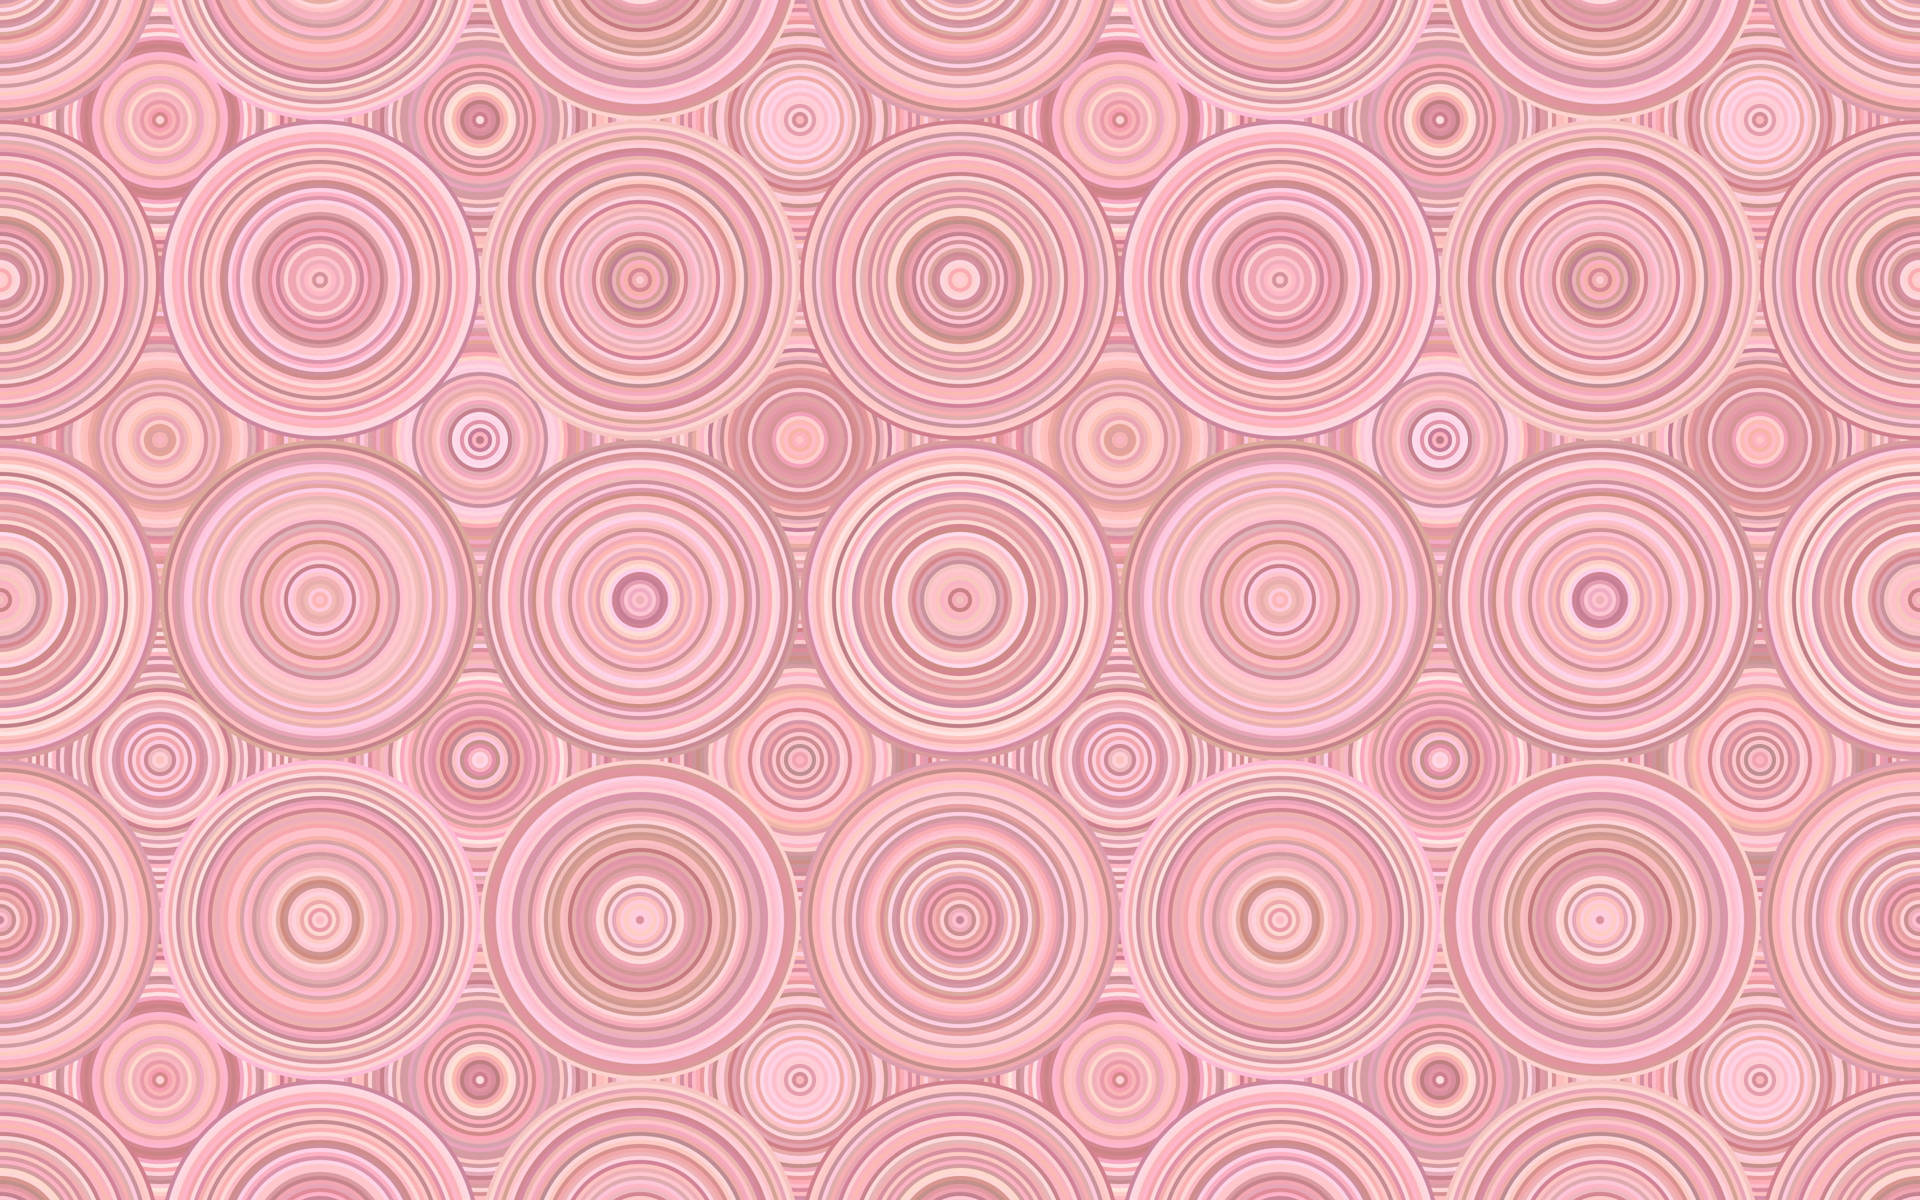 Circles On Pink Background Wallpaper